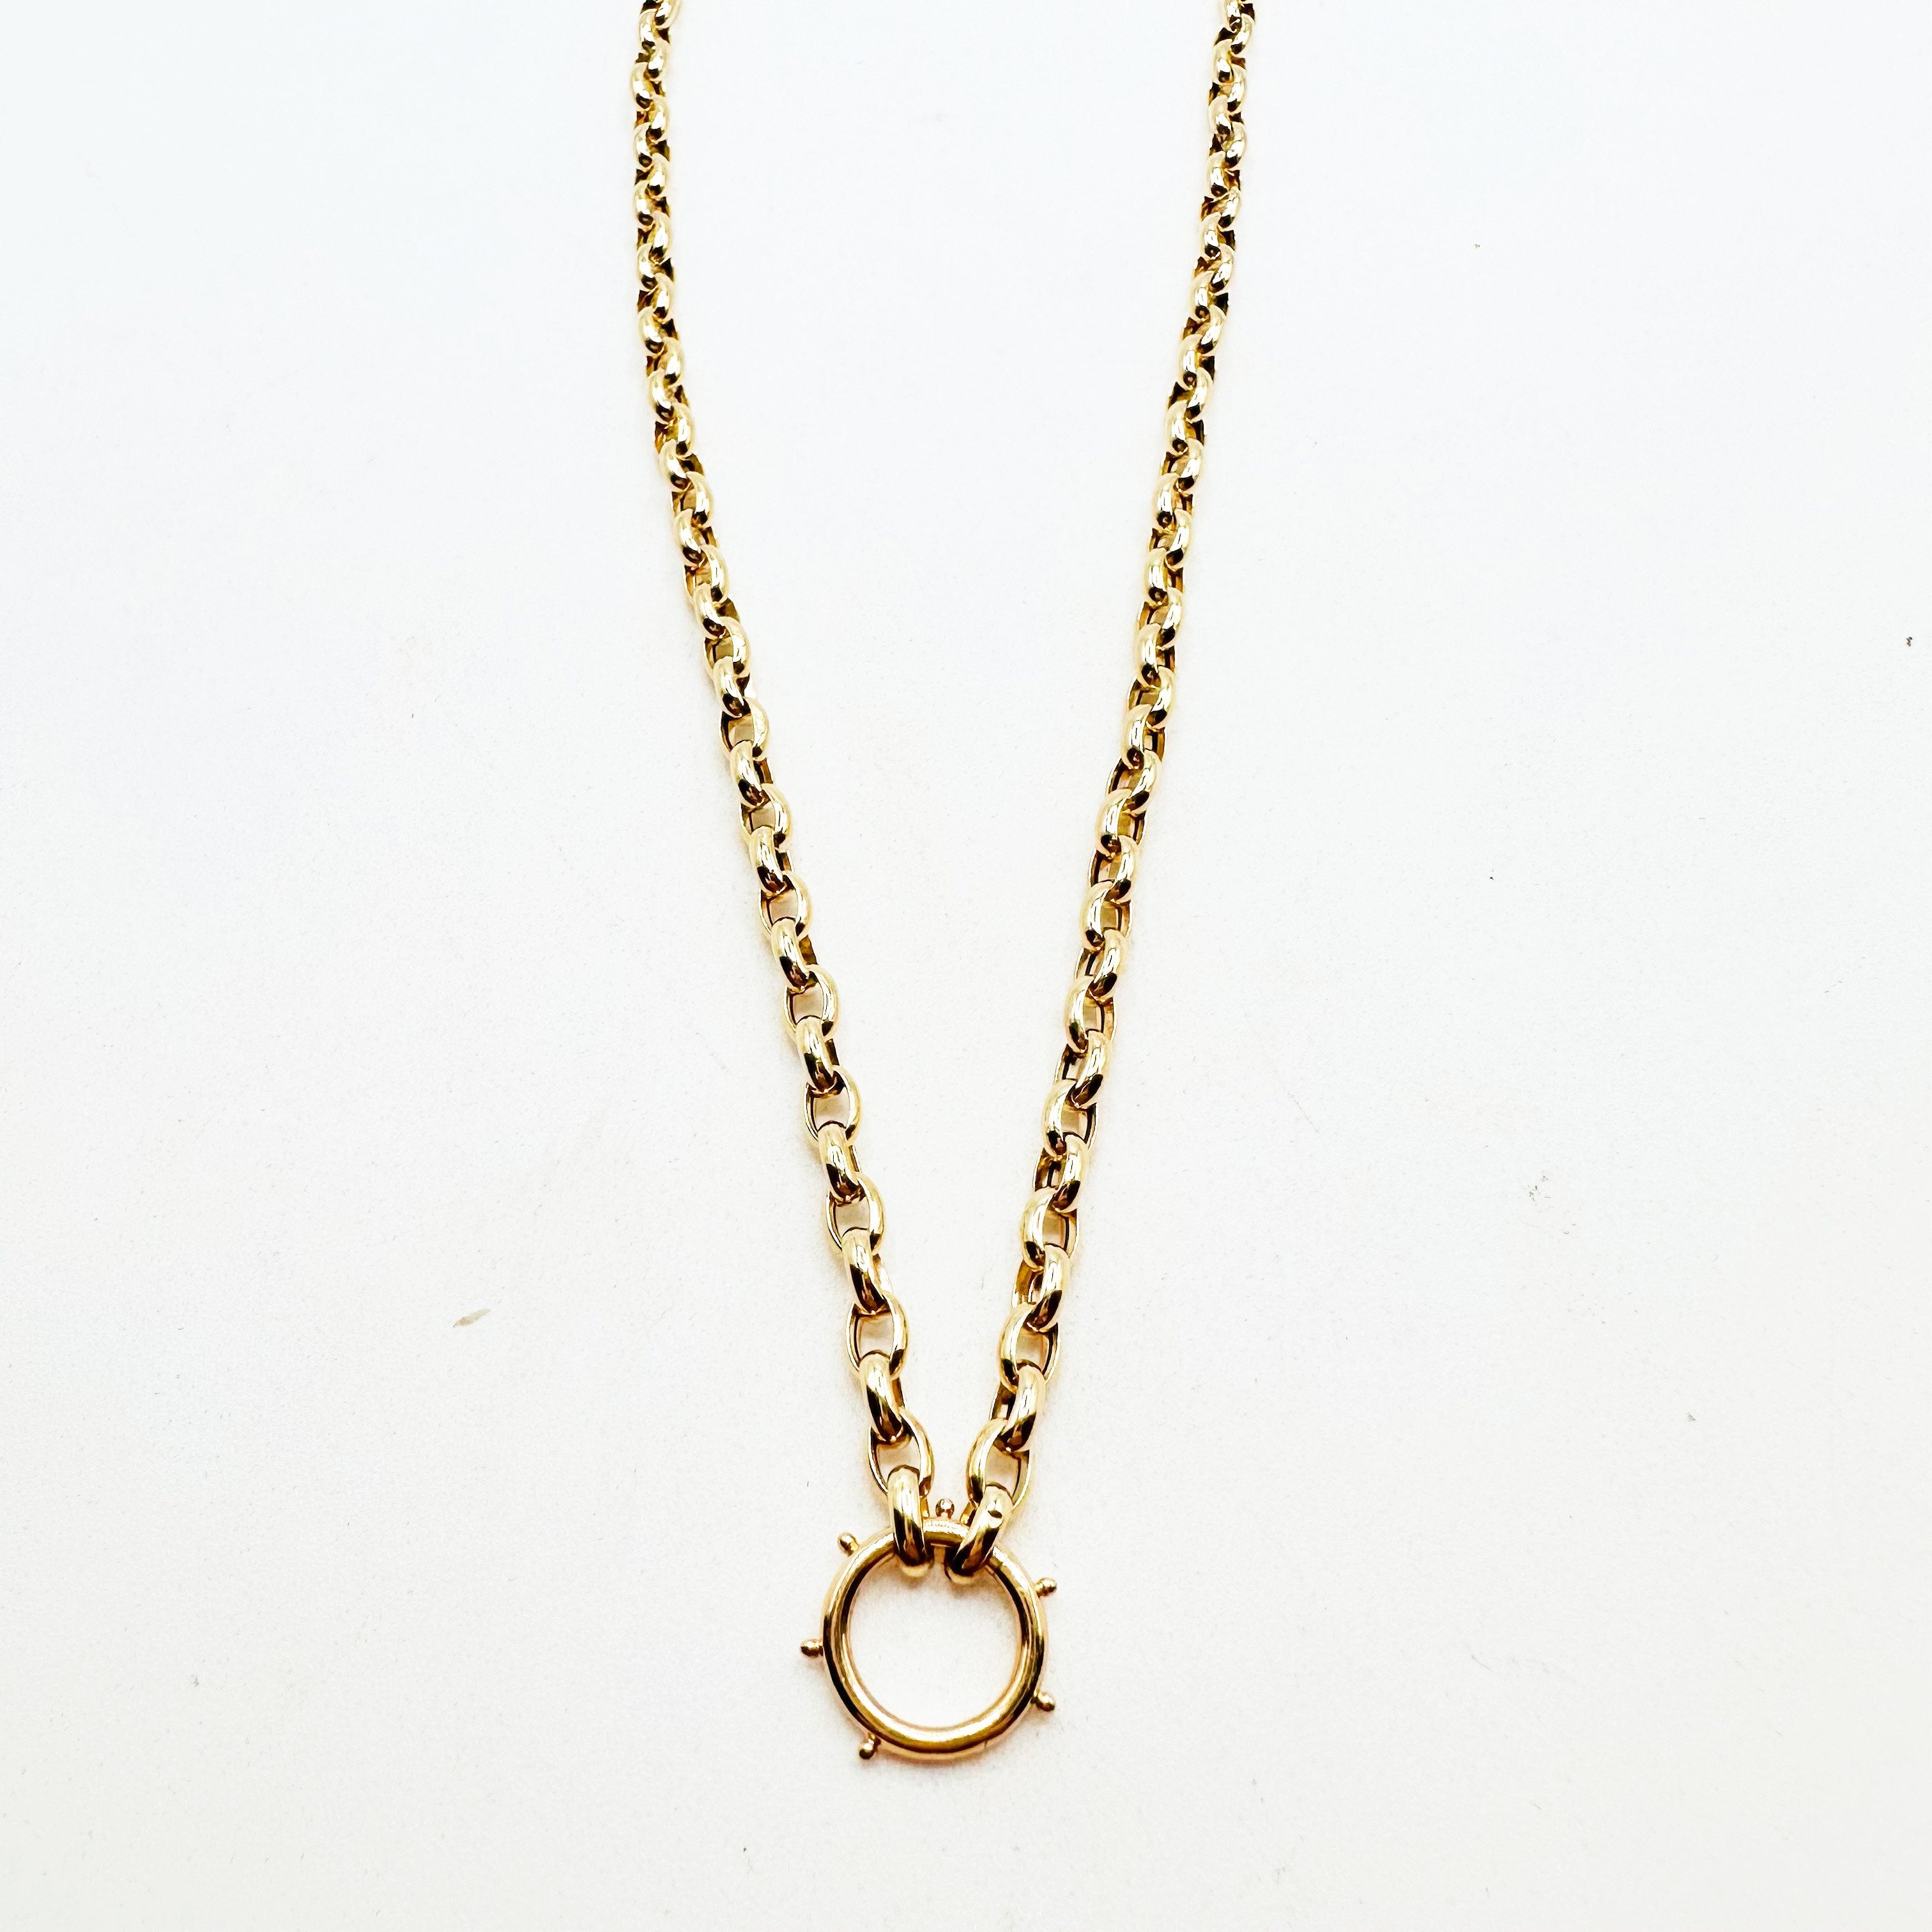 14k GOLD ROLO CHAIN WITH GOLD CHARM HOLDER